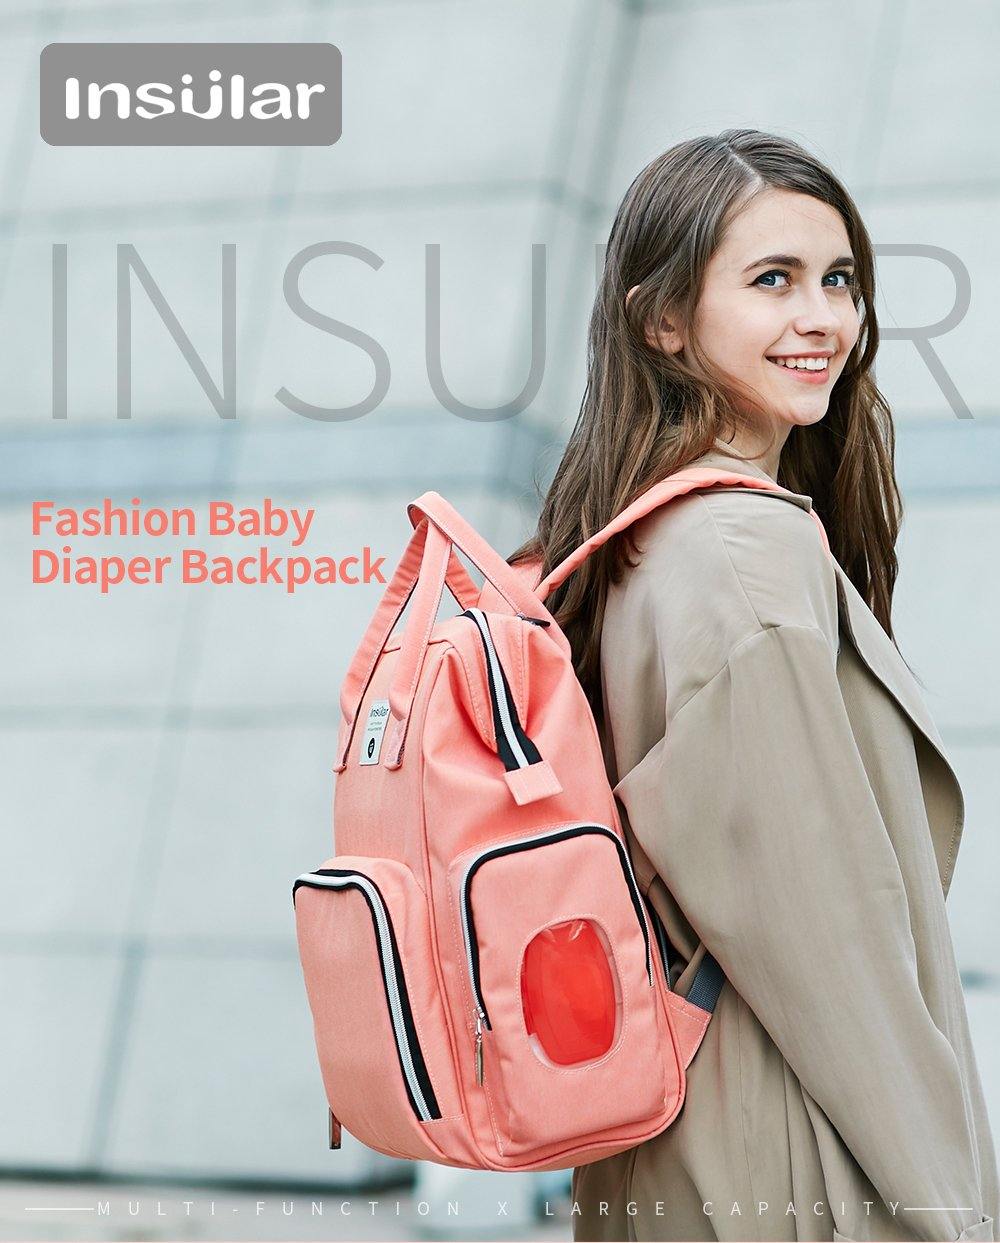 Insular Nappy Backpack II - Bags By Benson